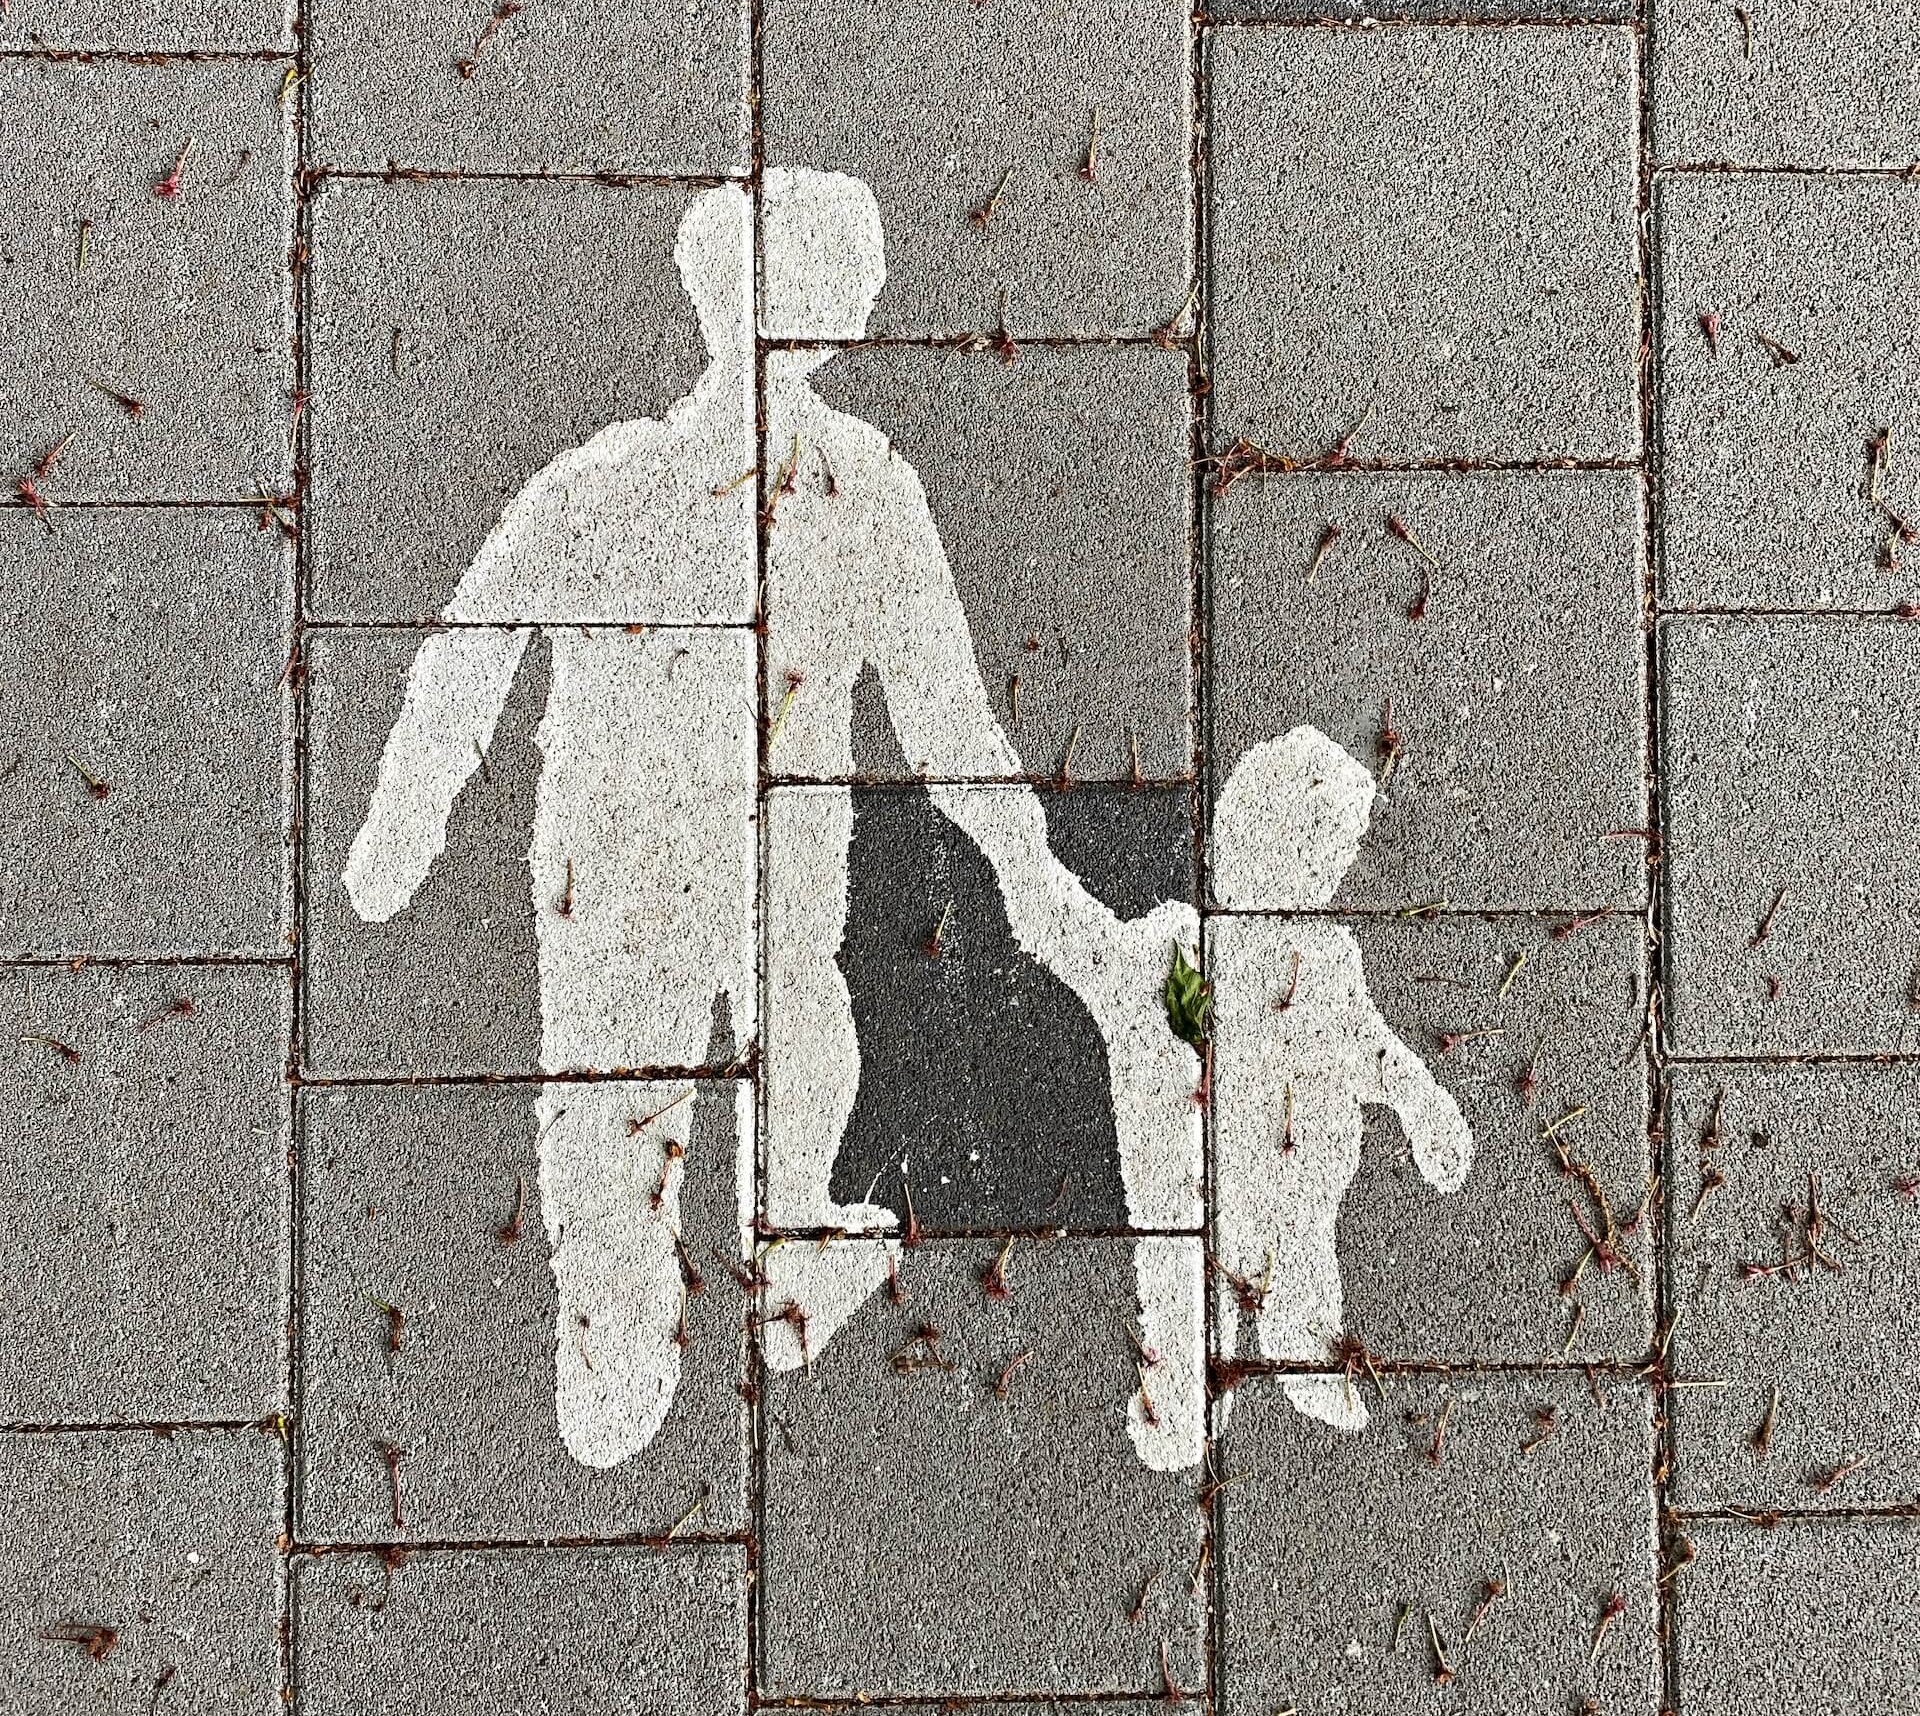 A sign on a path of a parent and child crossing the road